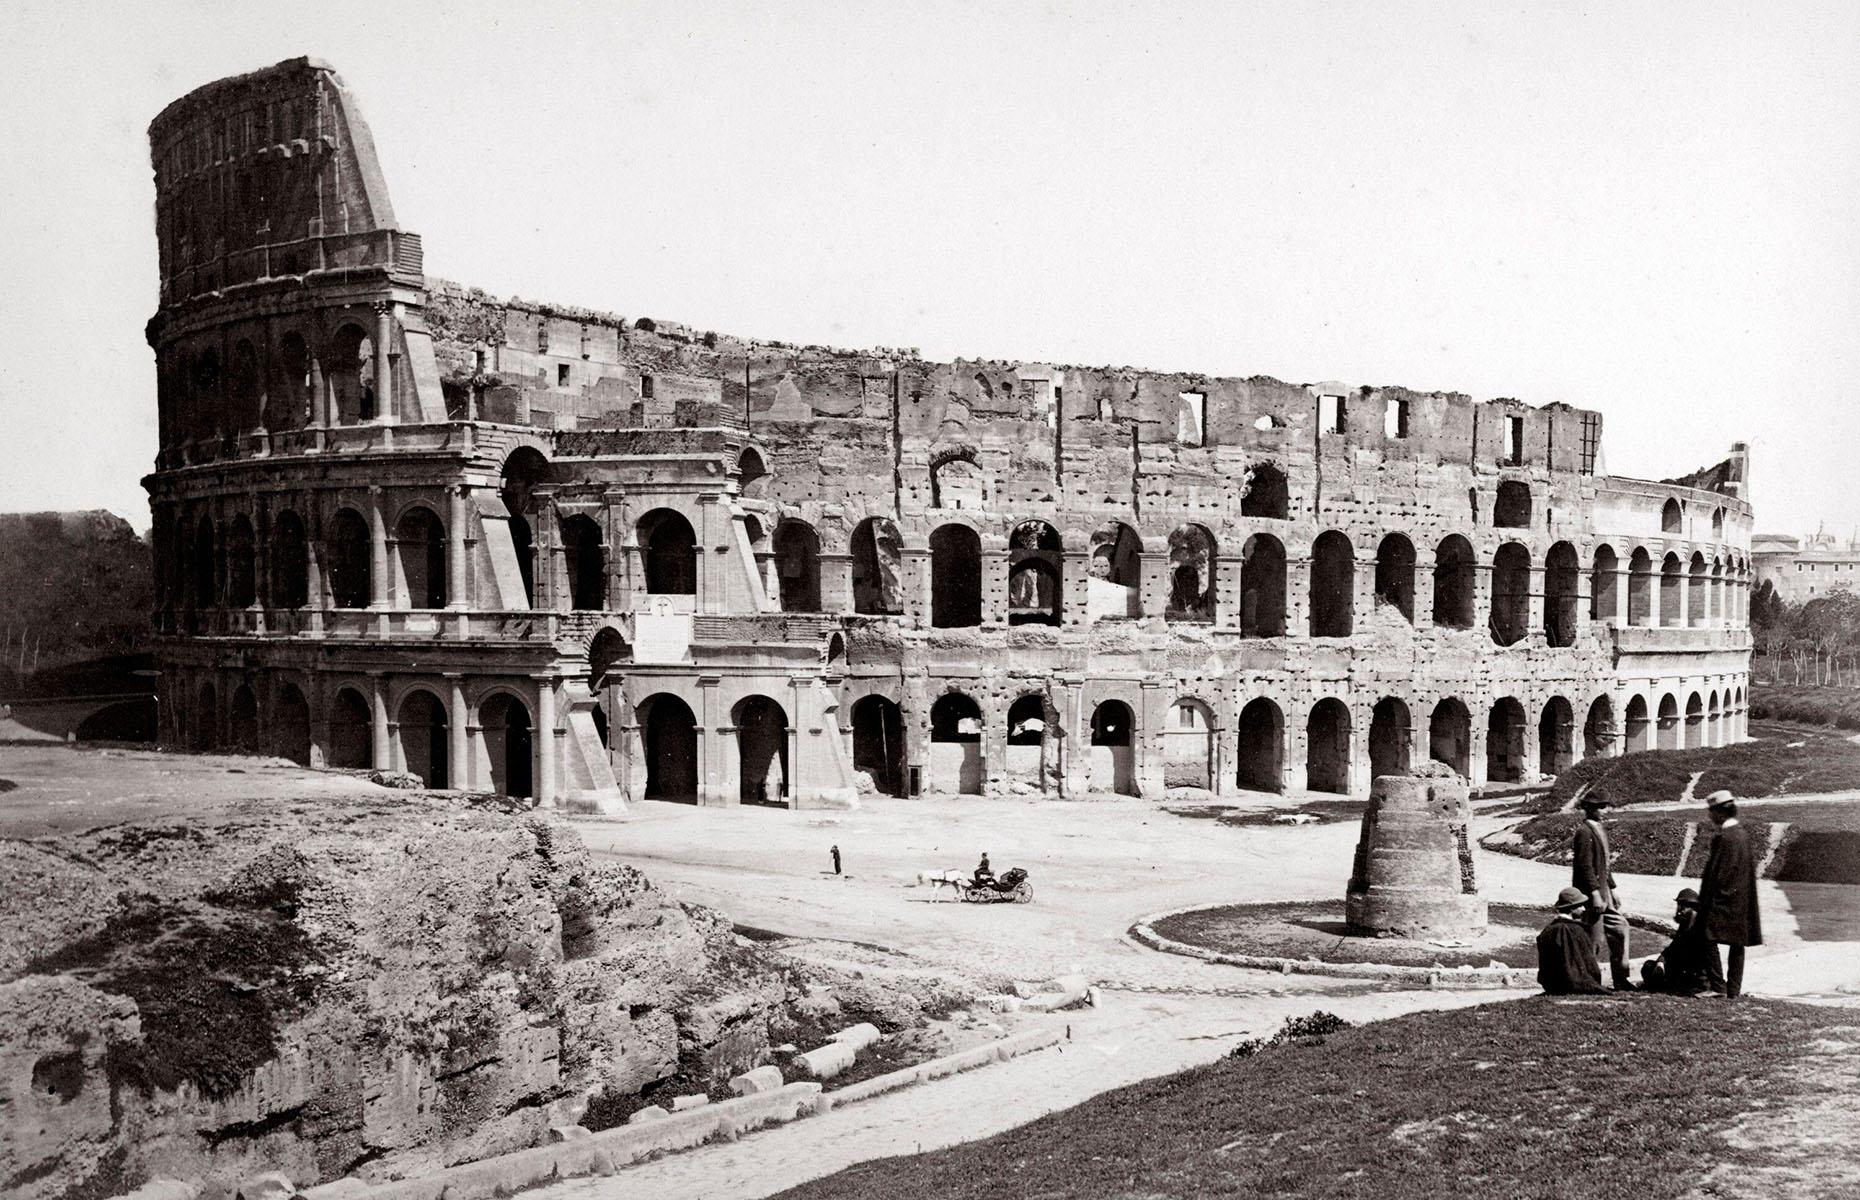 <p>The Colosseum in Rome is the most popular tourist attraction in Italy with an estimated 9.8 million people visiting in 2022 alone. But when this photo was taken in 1870, the once-mighty stadium lay abandoned and empty. It had been treated as a quarry for marble and stone for over 1,000 years. And with Rome a battleground in the war for Italian unification during this turbulent period, even the young aristocrats on their Grand Tour of Europe had stopped calling by to admire these ancient ruins.</p>